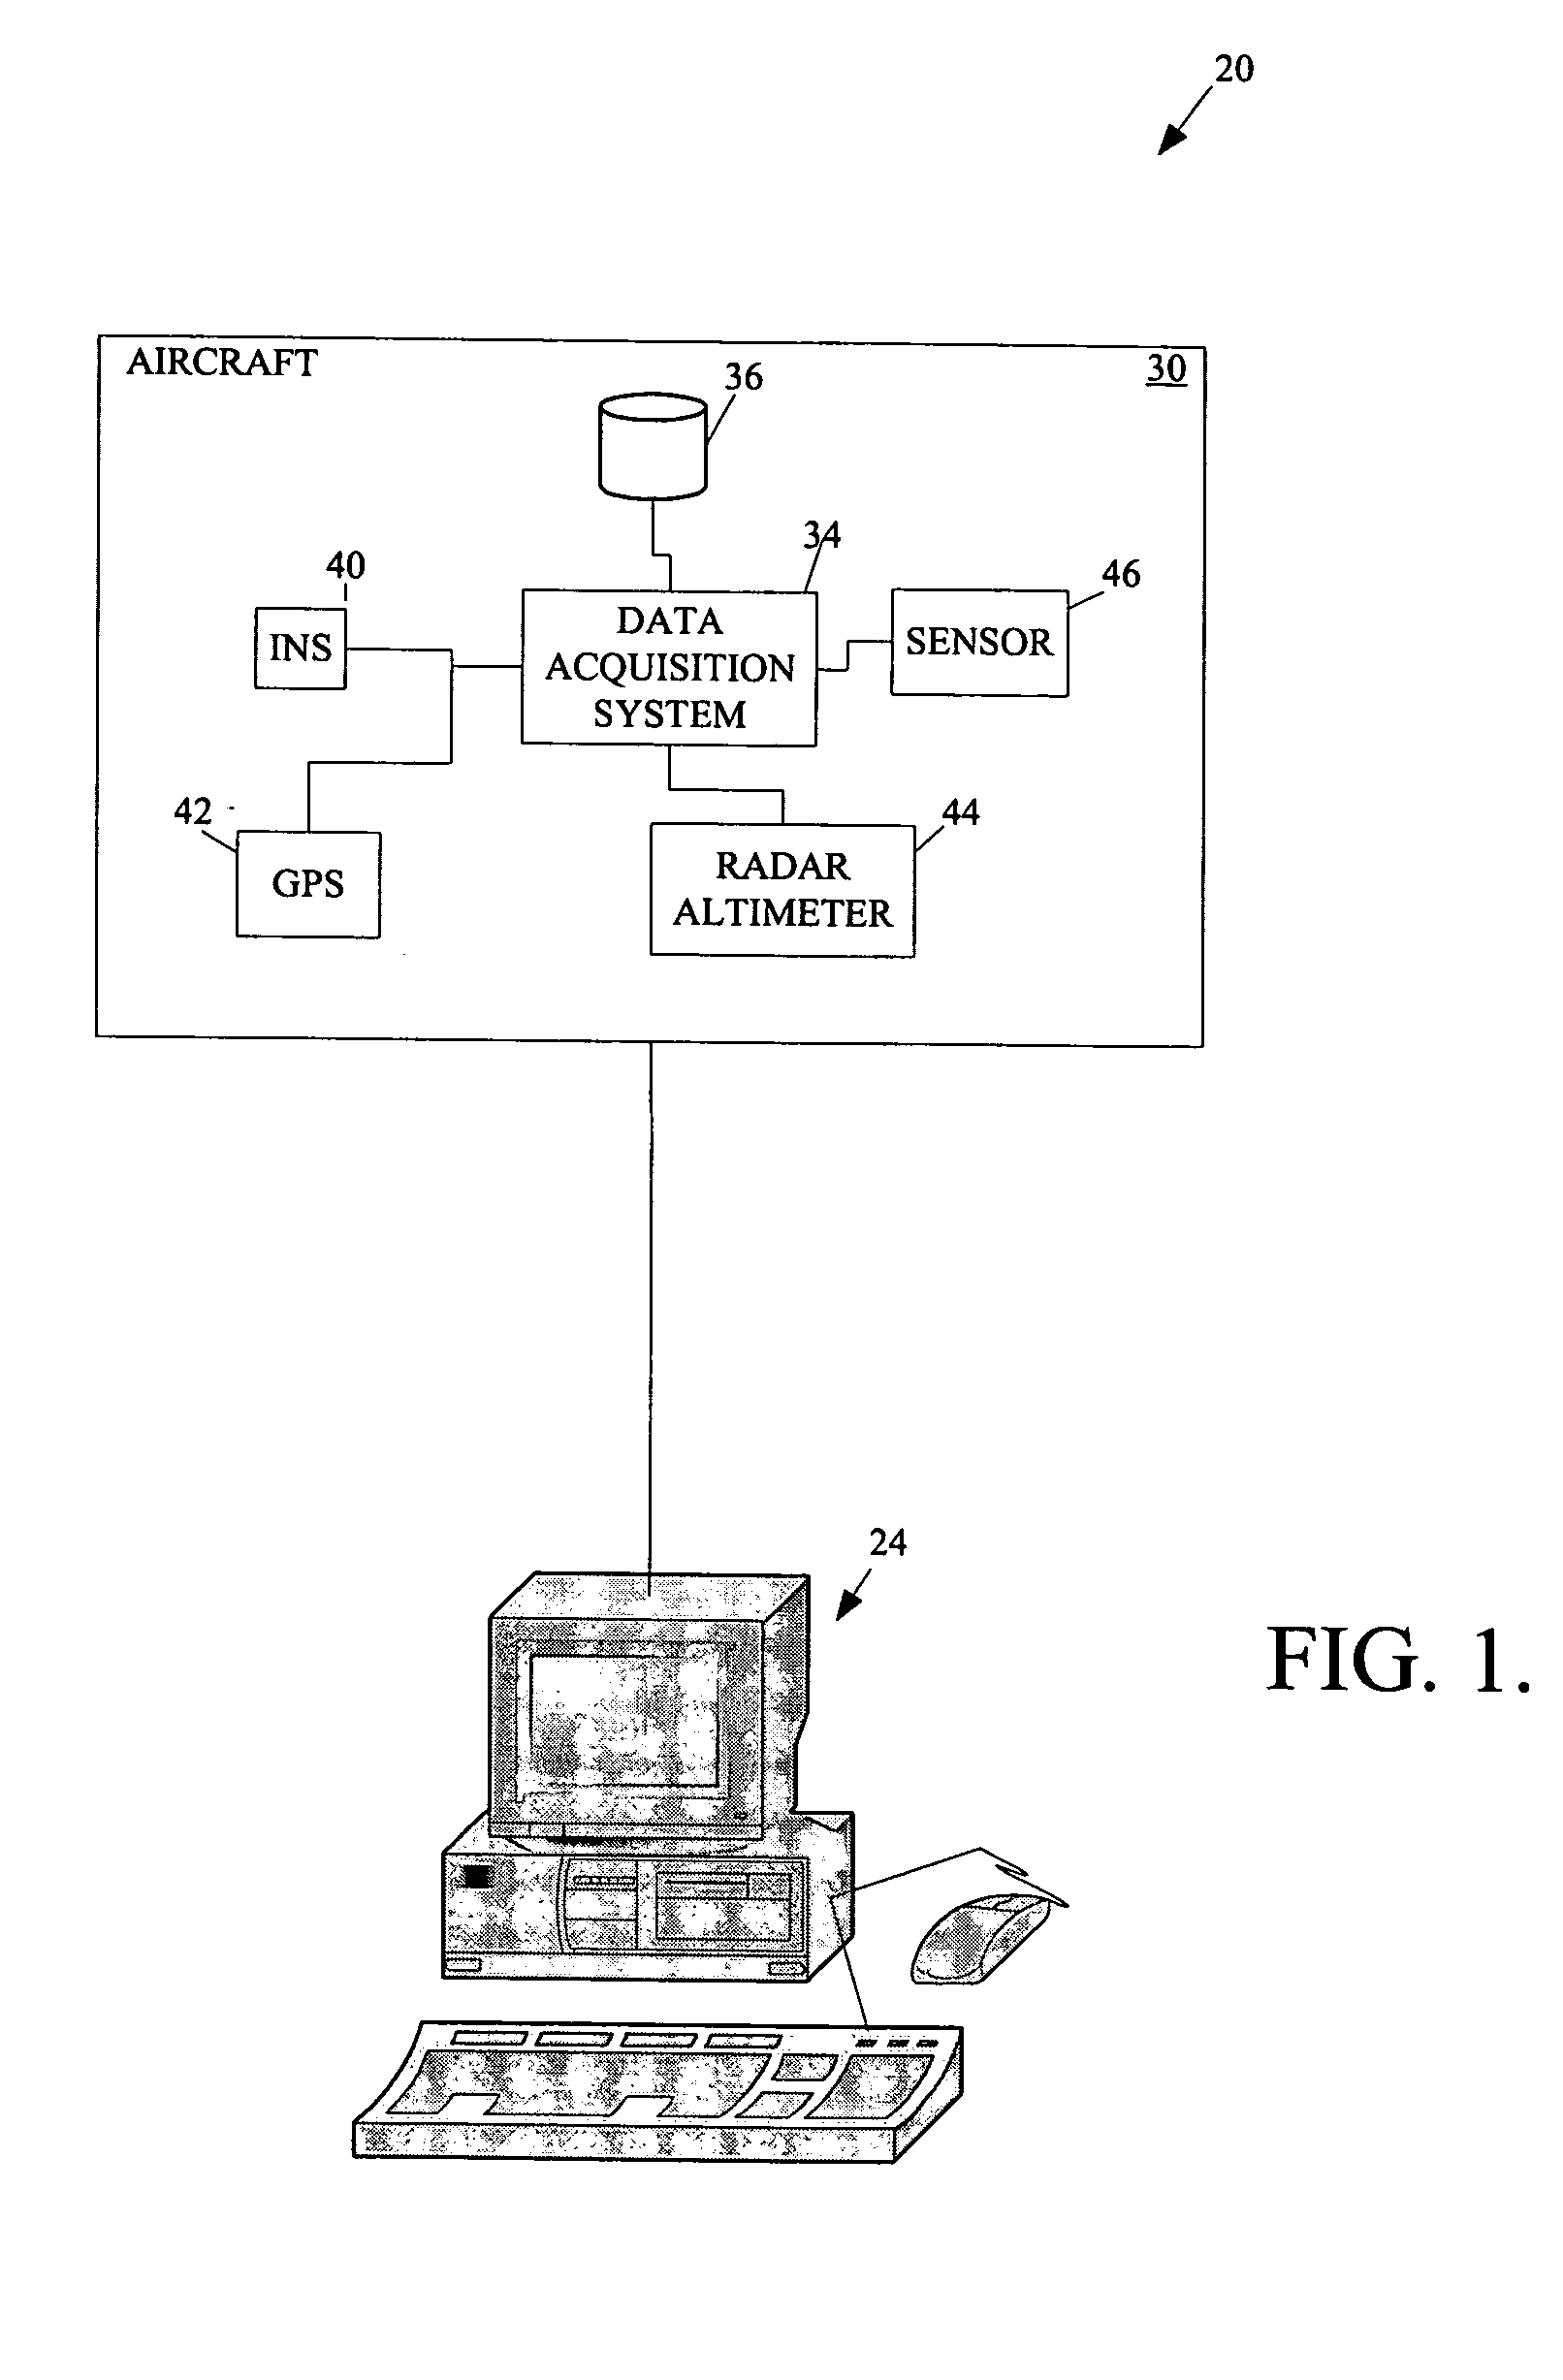 System and method for determining aircraft tapeline altitude